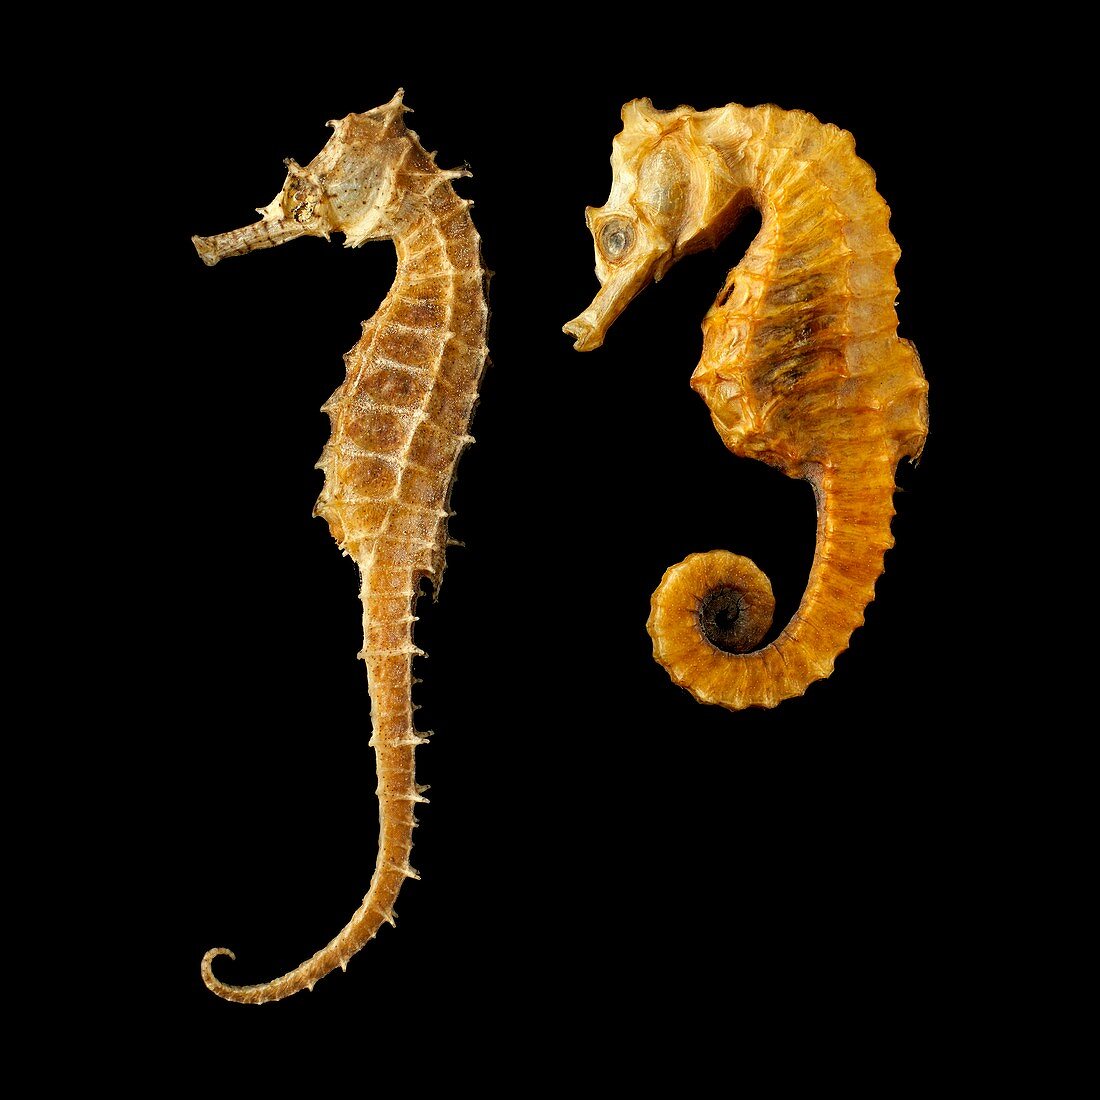 Two seahorses against black background